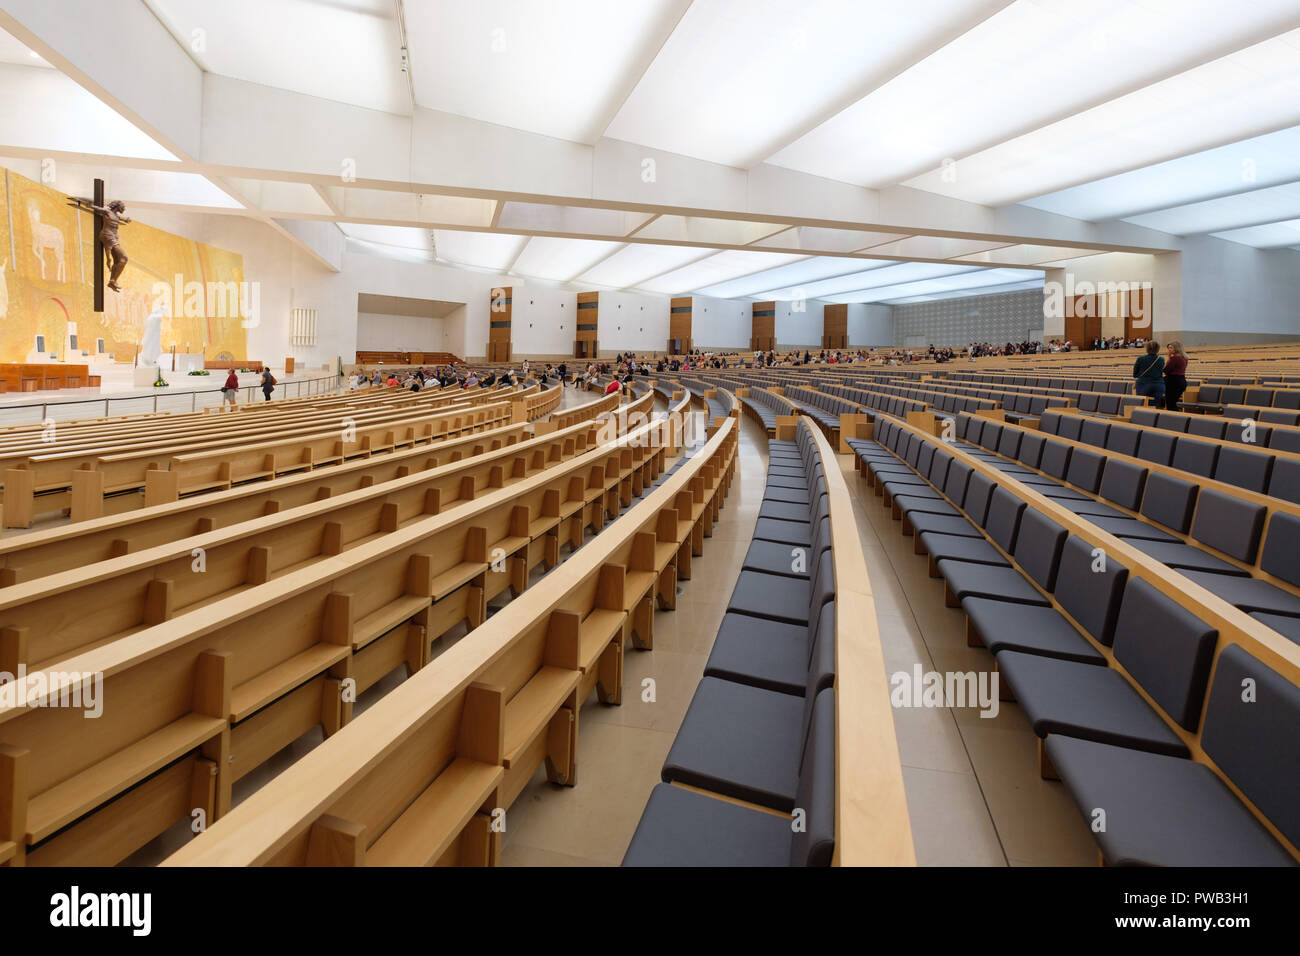 Interior view of the Basilica of the Holy Trinity at the Sanctuary of Our Lady of Fatima, in Fátima, Portugal, Europe Stock Photo